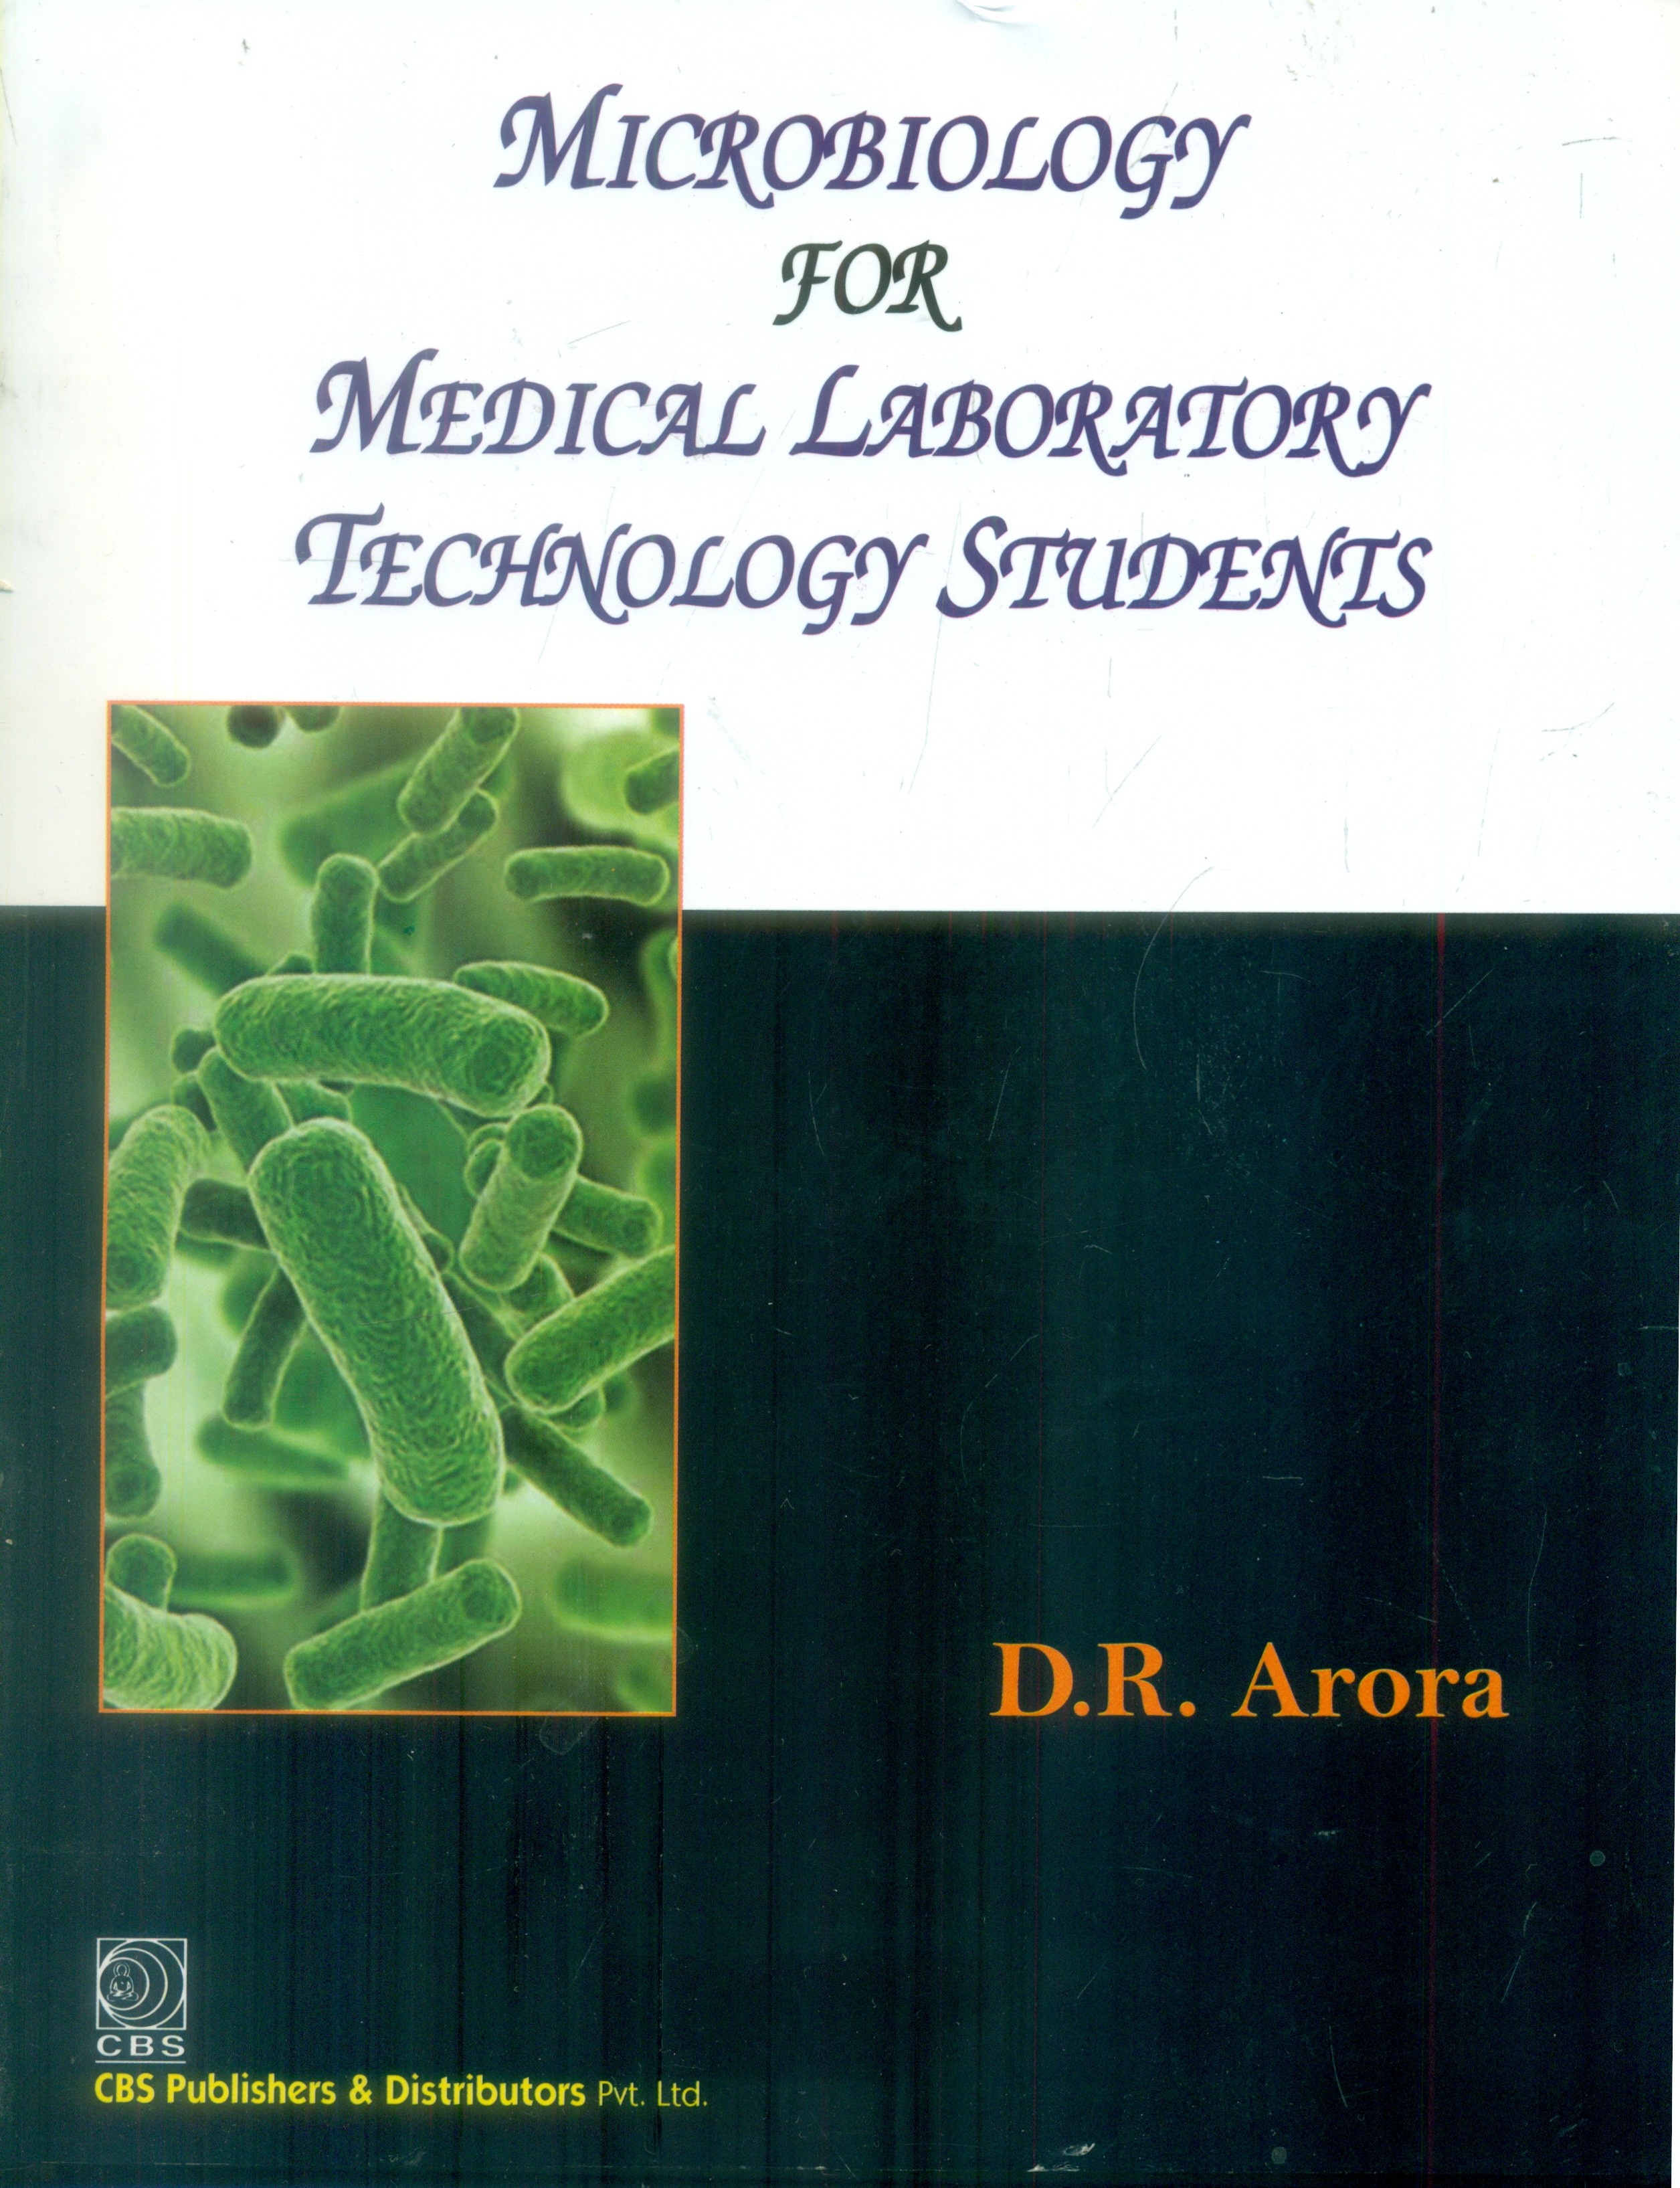 MICROBIOLOGY FOR MEDICAL LABORATORY TECHNOLOGY STUDENTS (PB 2018) 